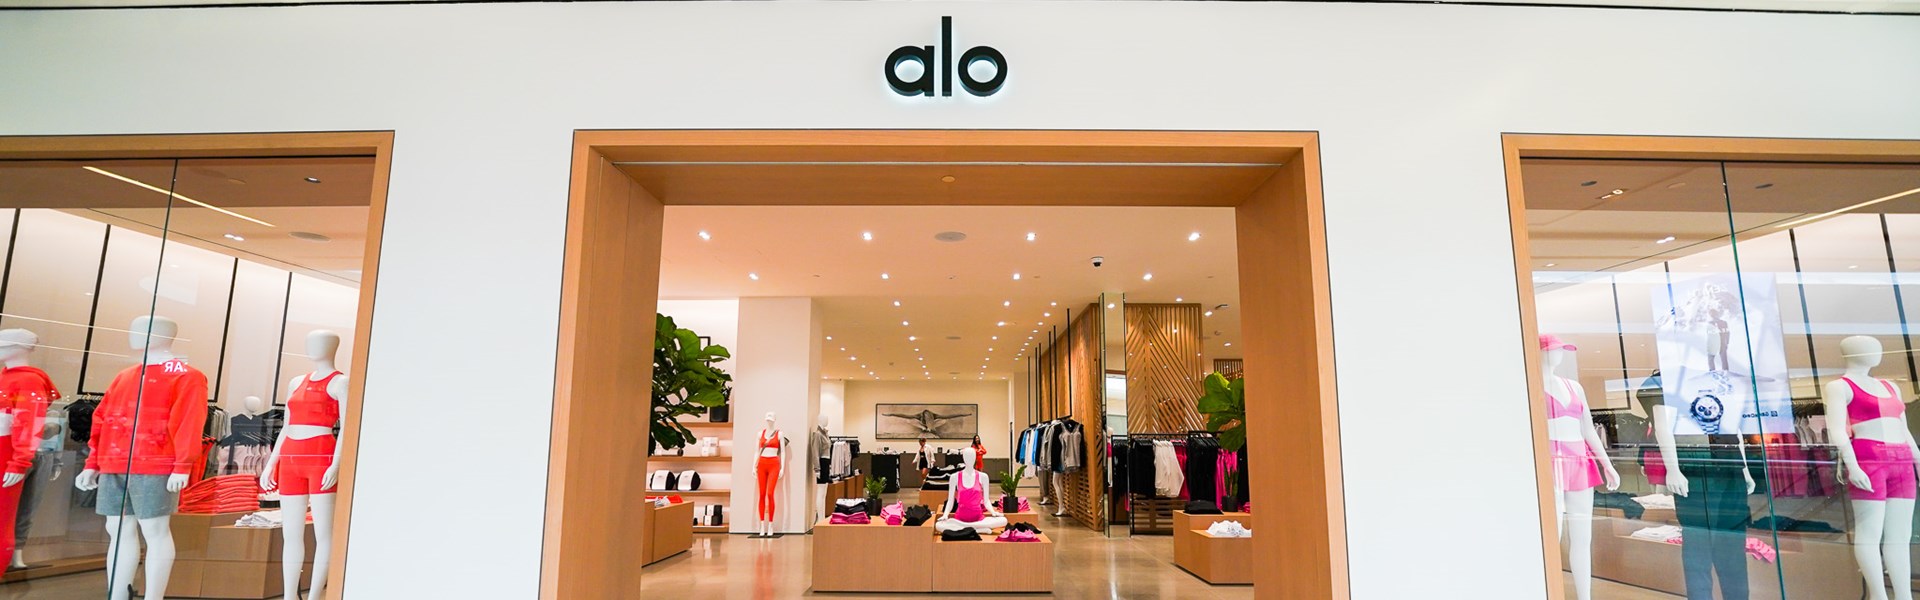 Welcome to The Shops at Clearfork, Alo Yoga! You can find Alo Yoga